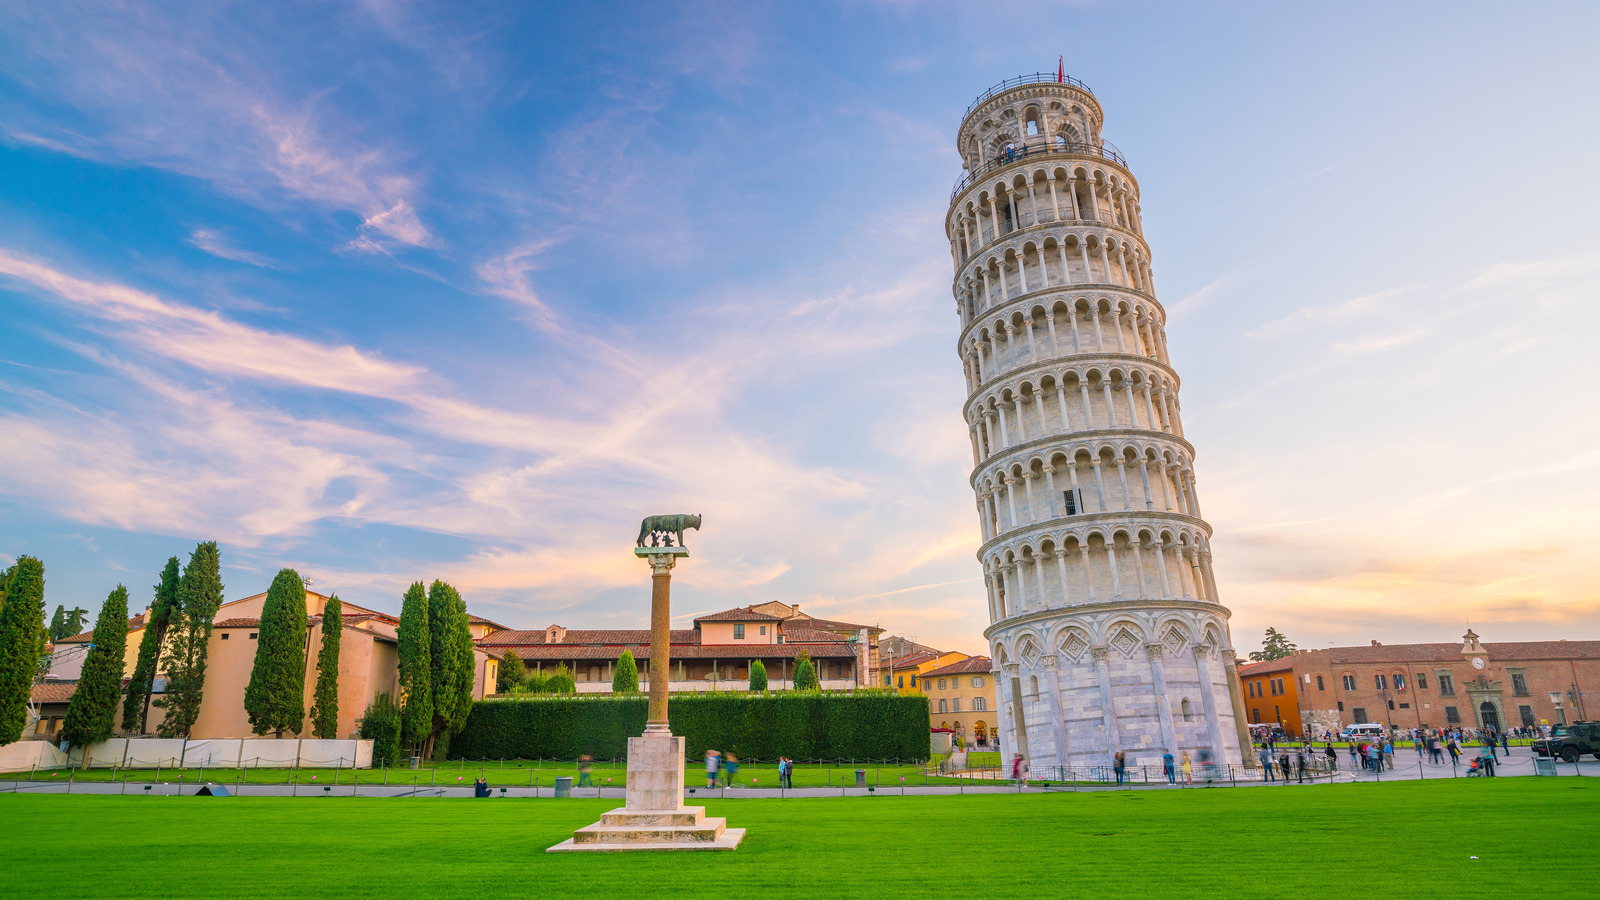 Will The Leaning Tower Of Pisa Ever Fall Over?